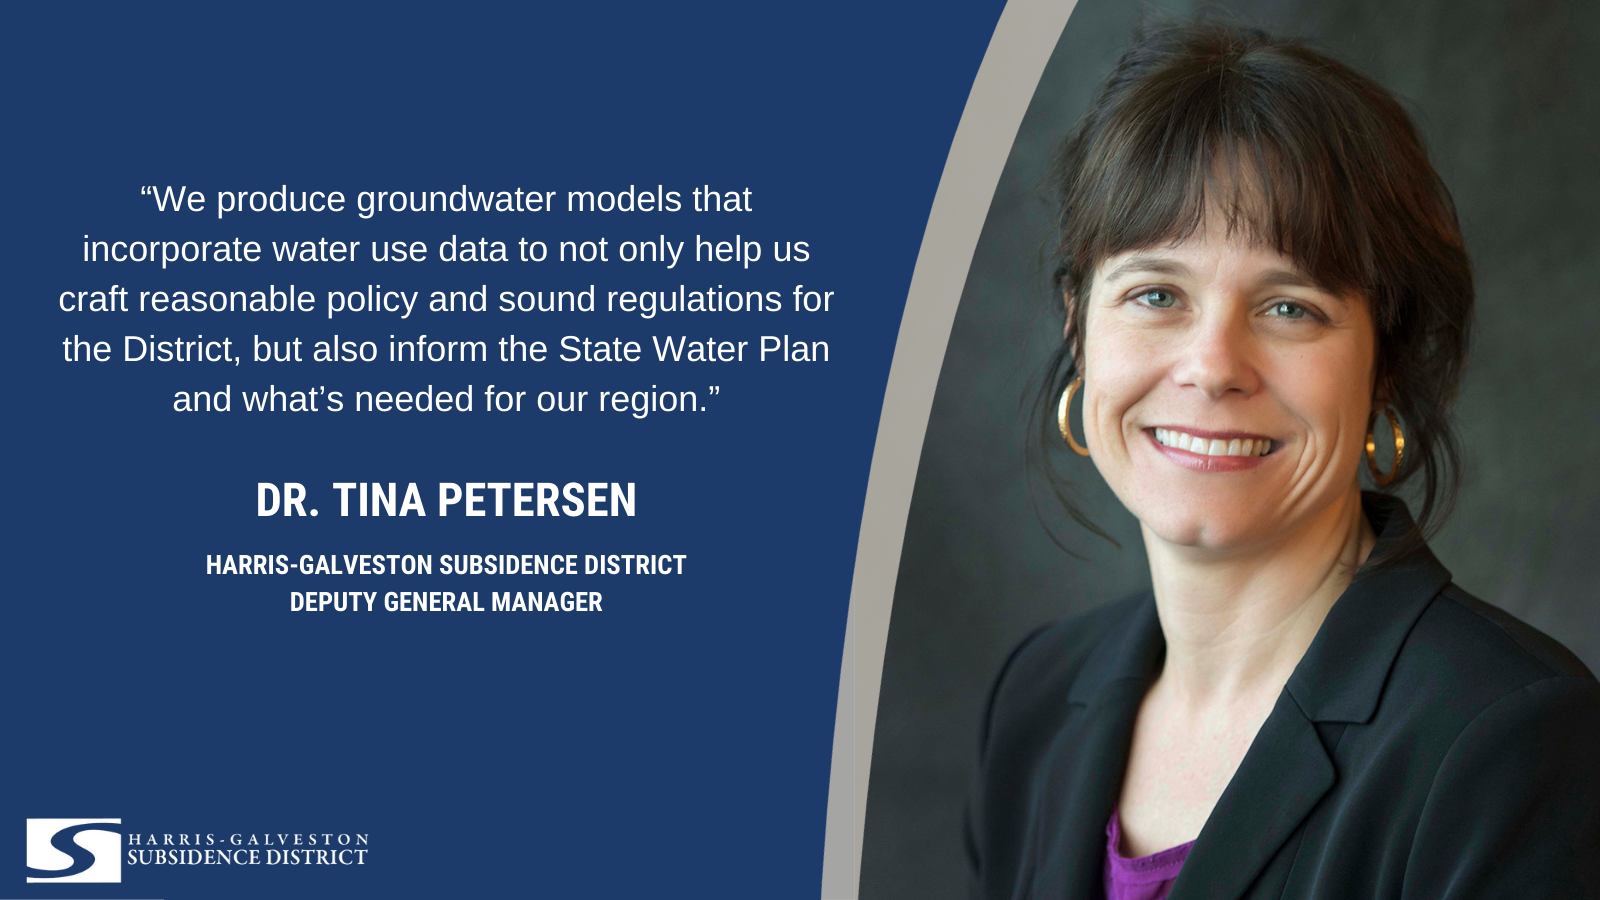 We produce groundwater models that incorporate water use data to not only help us craft reasonable policy and sound regulations for the District, but also inform the State Water Plan and regional water planning. Dr. Tina Petersen